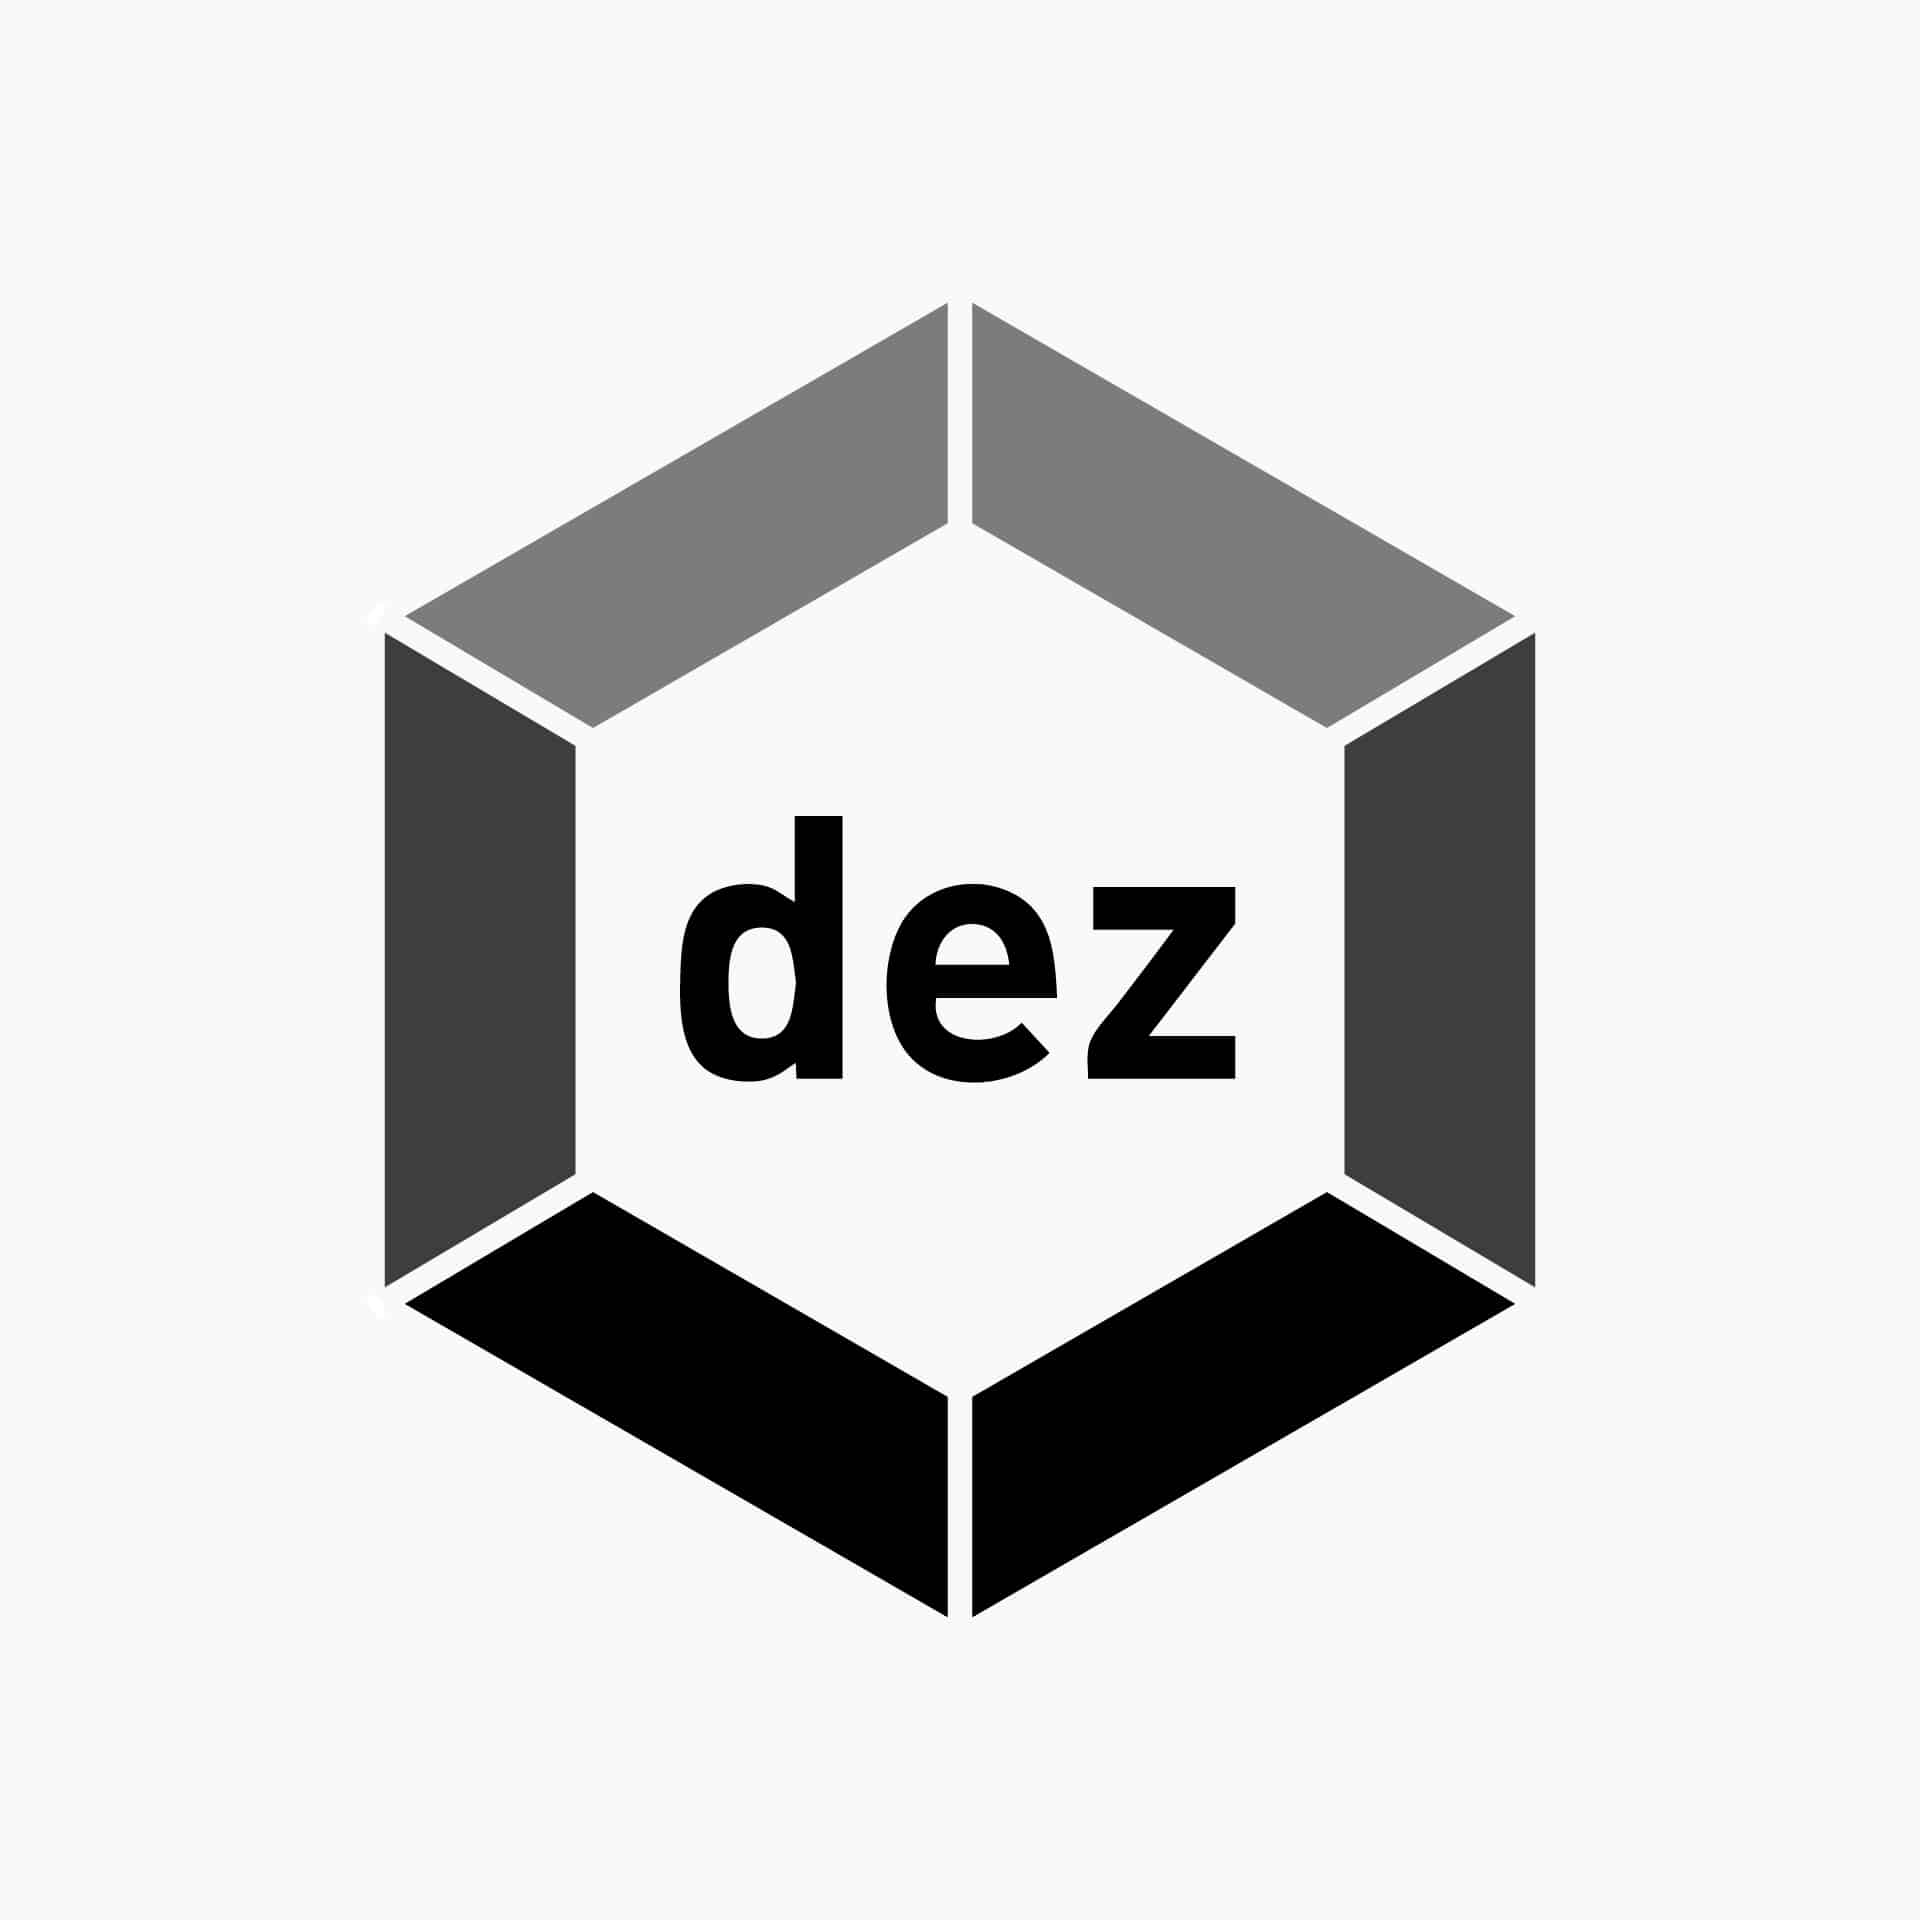 A logo features a hexagon divided into six triangular sections, each in varying shades of gray. The word "dez" is centered within the hexagon and written in lowercase letters.